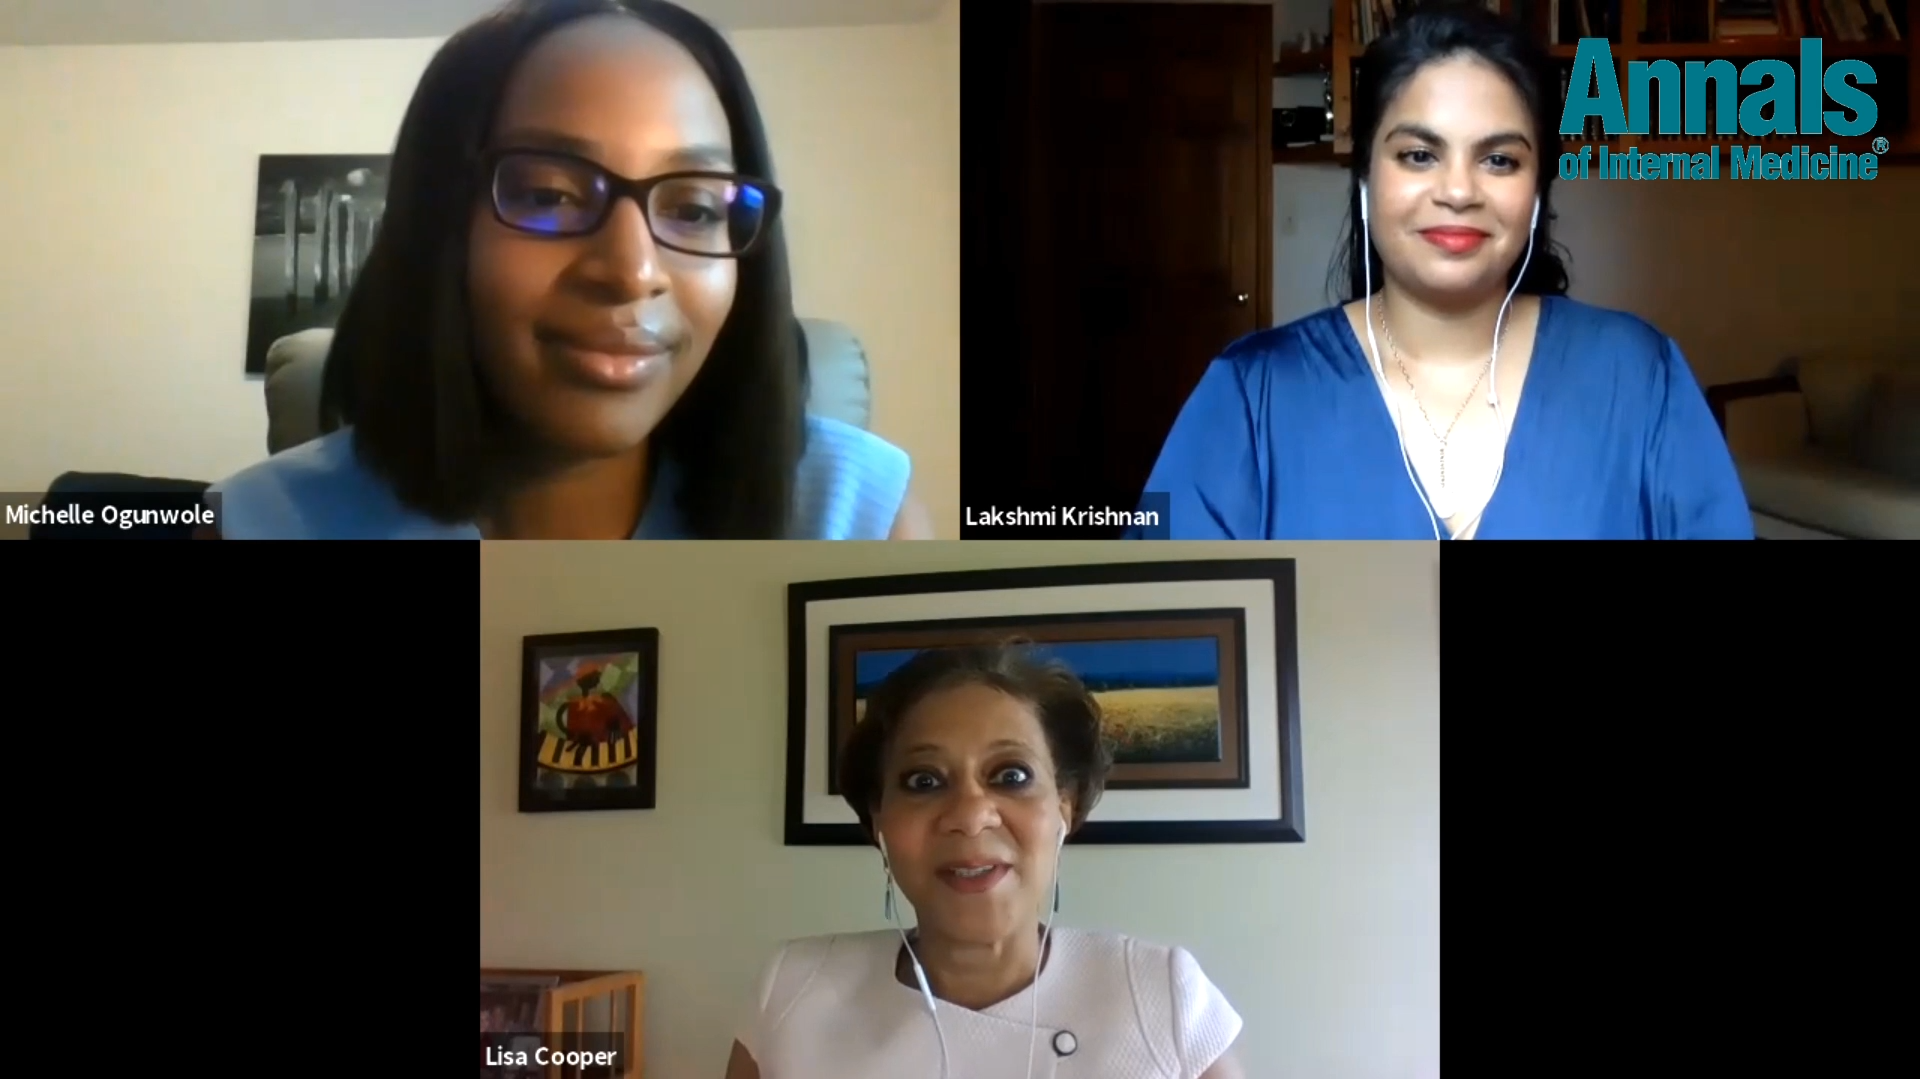 Dr. Lakshmi Krishnan, Dr. S. Michelle Ogunwole and Dr. Lisa A. Cooper in a video presentation of their Annals of Internal Medicine article 